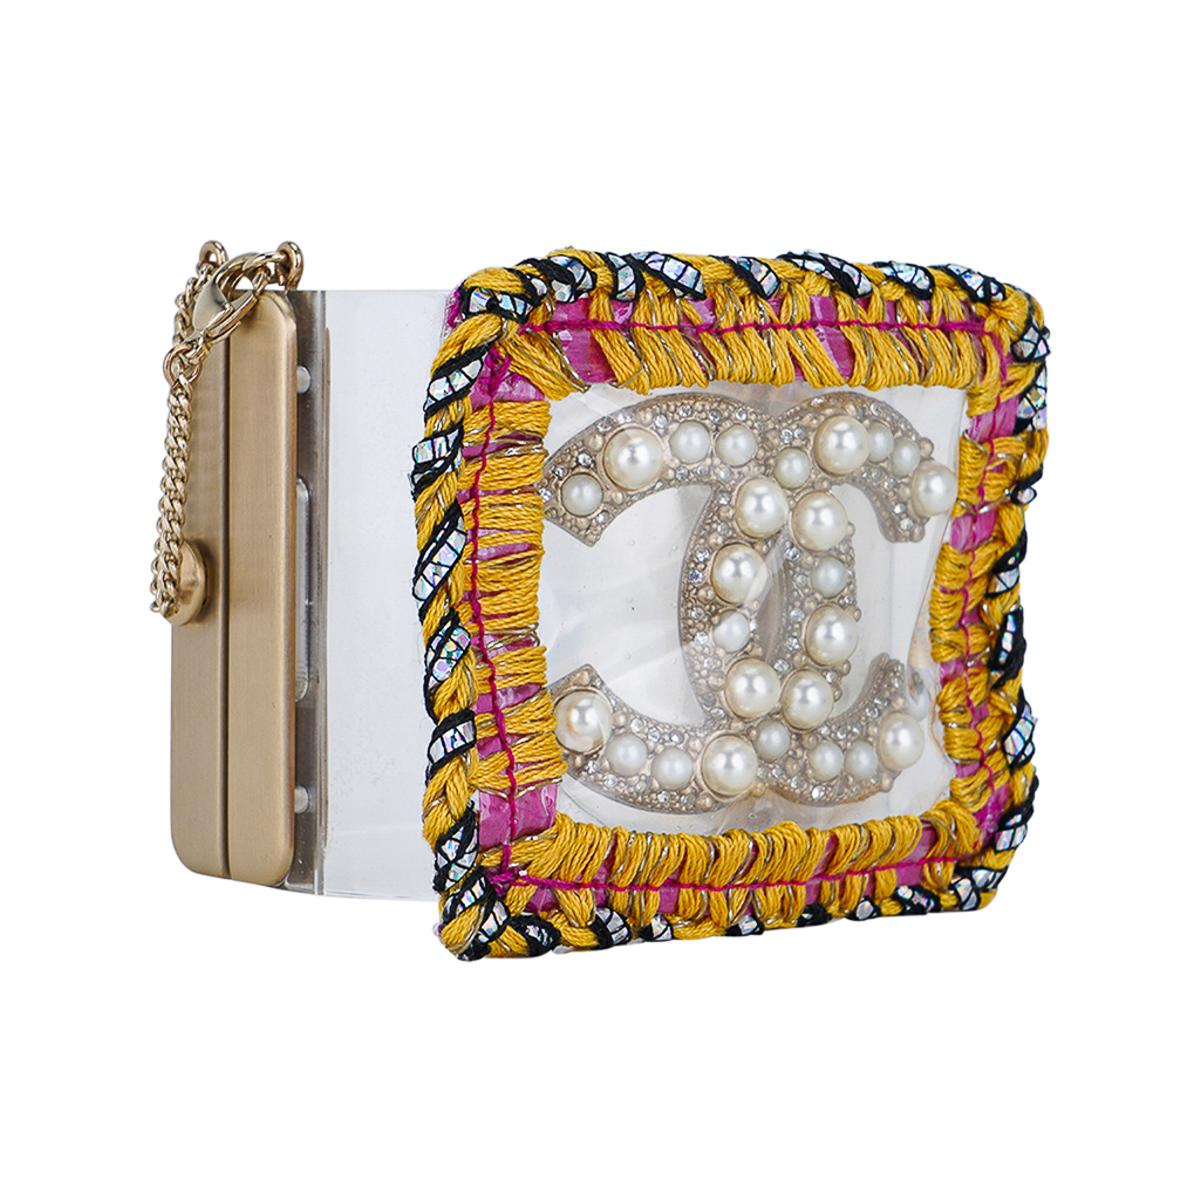 Mightychic offers a Chanel lucite, pearl and embroidered cuff bracelet.
Bold pearl CC encased in plastic with a bold embroidered edge.
Spring hinge closure.
This fabulous bold statement cuff is timeless and perfect to dress up or down.
Comes with